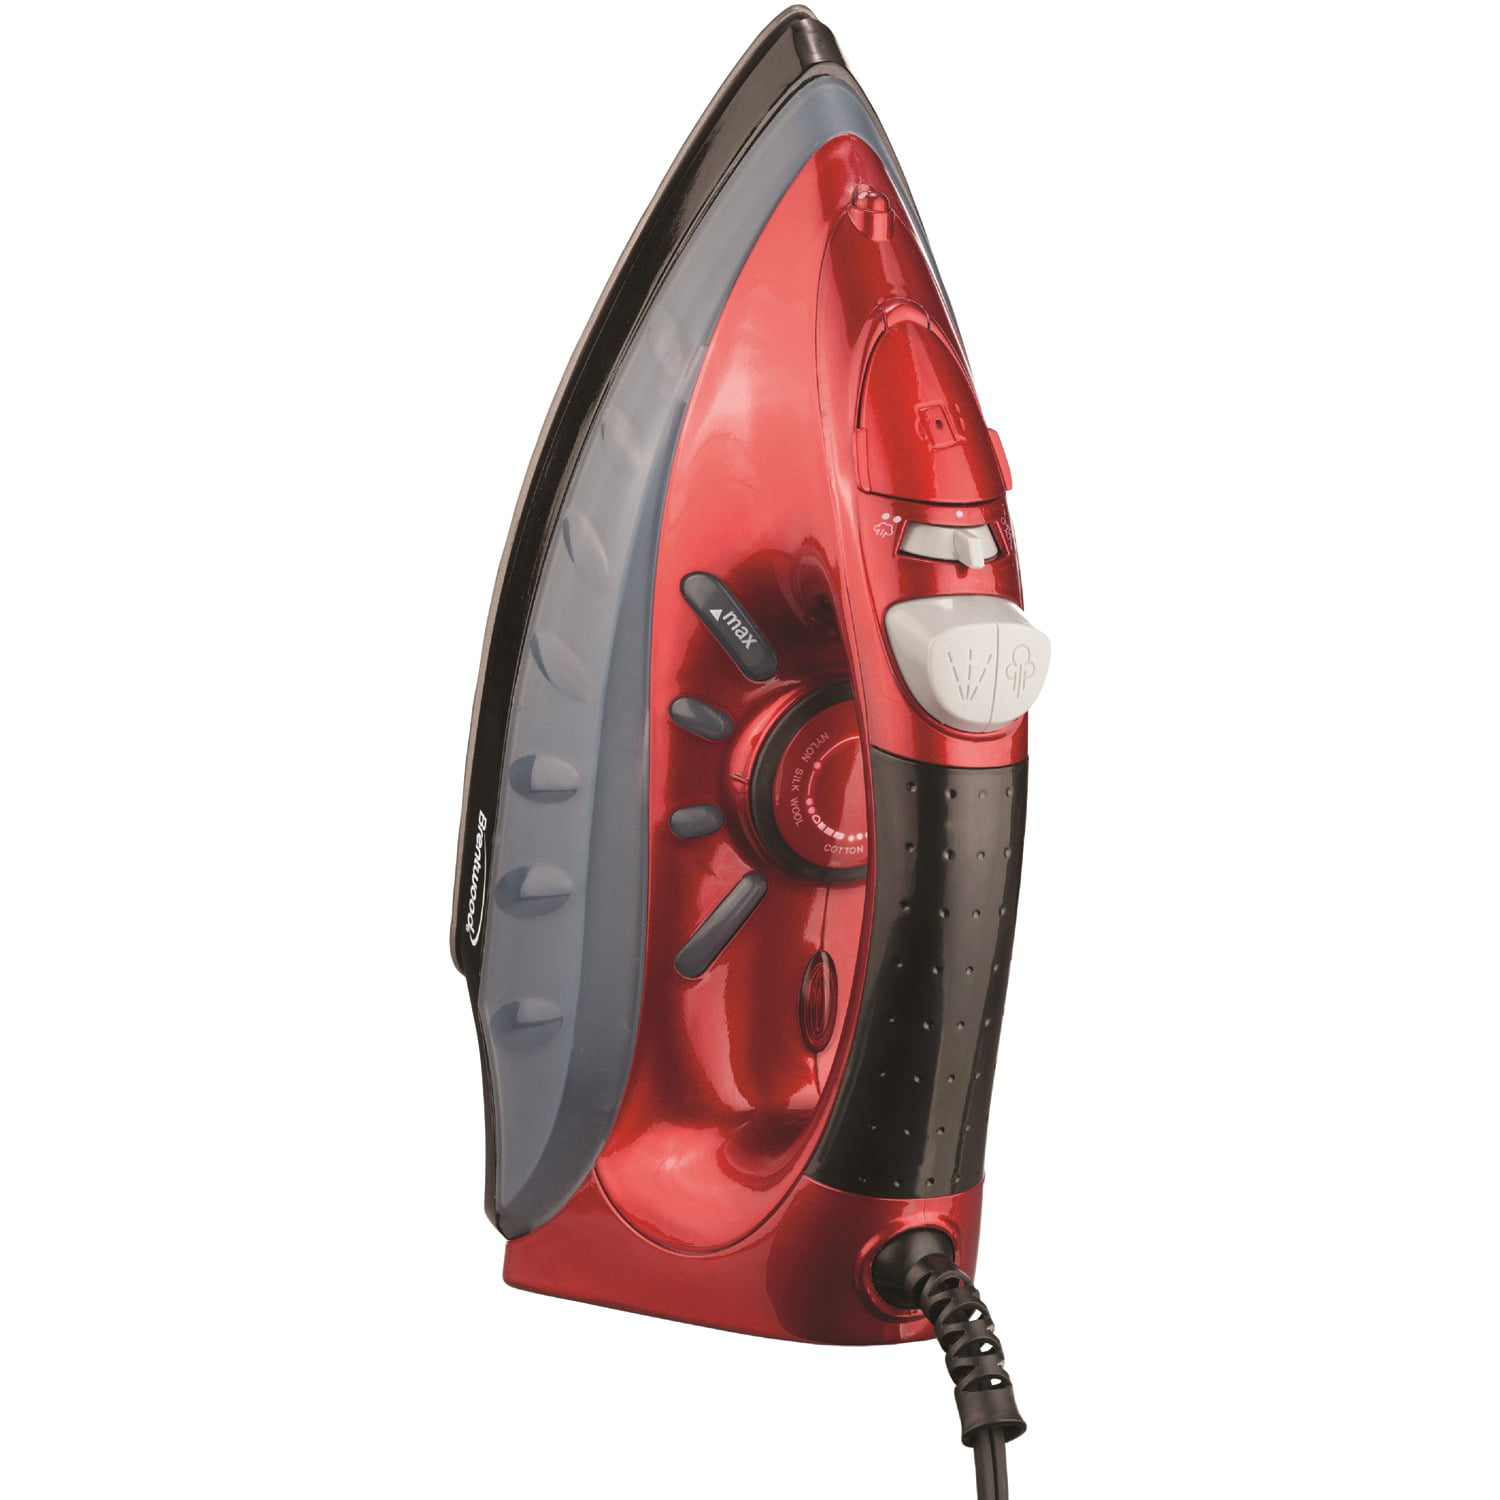 Brentwood Appliances Mpi-53 Steam Spray Dry Iron 